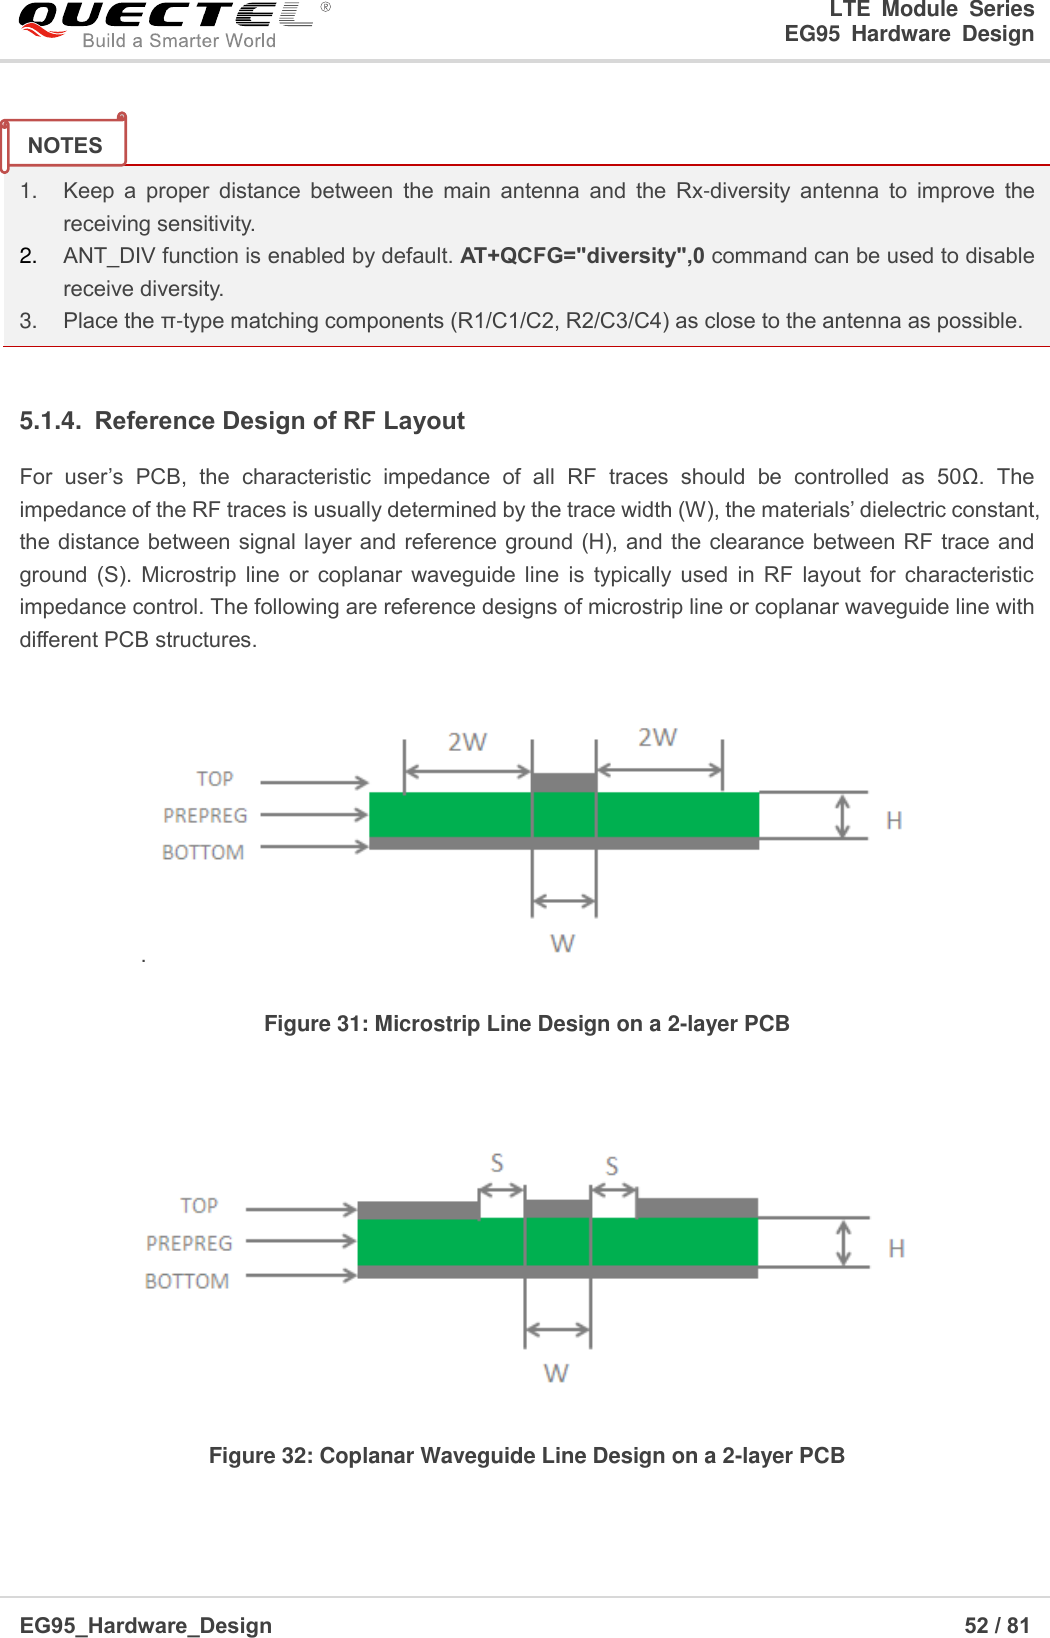 LTE  Module  Series                                                  EG95  Hardware  Design  EG95_Hardware_Design                                                                   52 / 81     1. Keep  a  proper  distance  between  the  main  antenna  and  the  Rx-diversity  antenna  to  improve  the receiving sensitivity. 2. ANT_DIV function is enabled by default. AT+QCFG=&quot;diversity&quot;,0 command can be used to disable receive diversity. 3. Place the π-type matching components (R1/C1/C2, R2/C3/C4) as close to the antenna as possible.  5.1.4.  Reference Design of RF Layout   For  user’s  PCB,  the  characteristic  impedance  of  all  RF  traces  should  be  controlled  as  50Ω.  The impedance of the RF traces is usually determined by the trace width (W), the materials’ dielectric constant, the distance between signal layer and reference ground (H), and the clearance between RF trace and ground  (S).  Microstrip  line  or  coplanar  waveguide  line  is  typically  used  in  RF  layout  for  characteristic impedance control. The following are reference designs of microstrip line or coplanar waveguide line with different PCB structures. .   Figure 31: Microstrip Line Design on a 2-layer PCB   Figure 32: Coplanar Waveguide Line Design on a 2-layer PCB  NOTES 